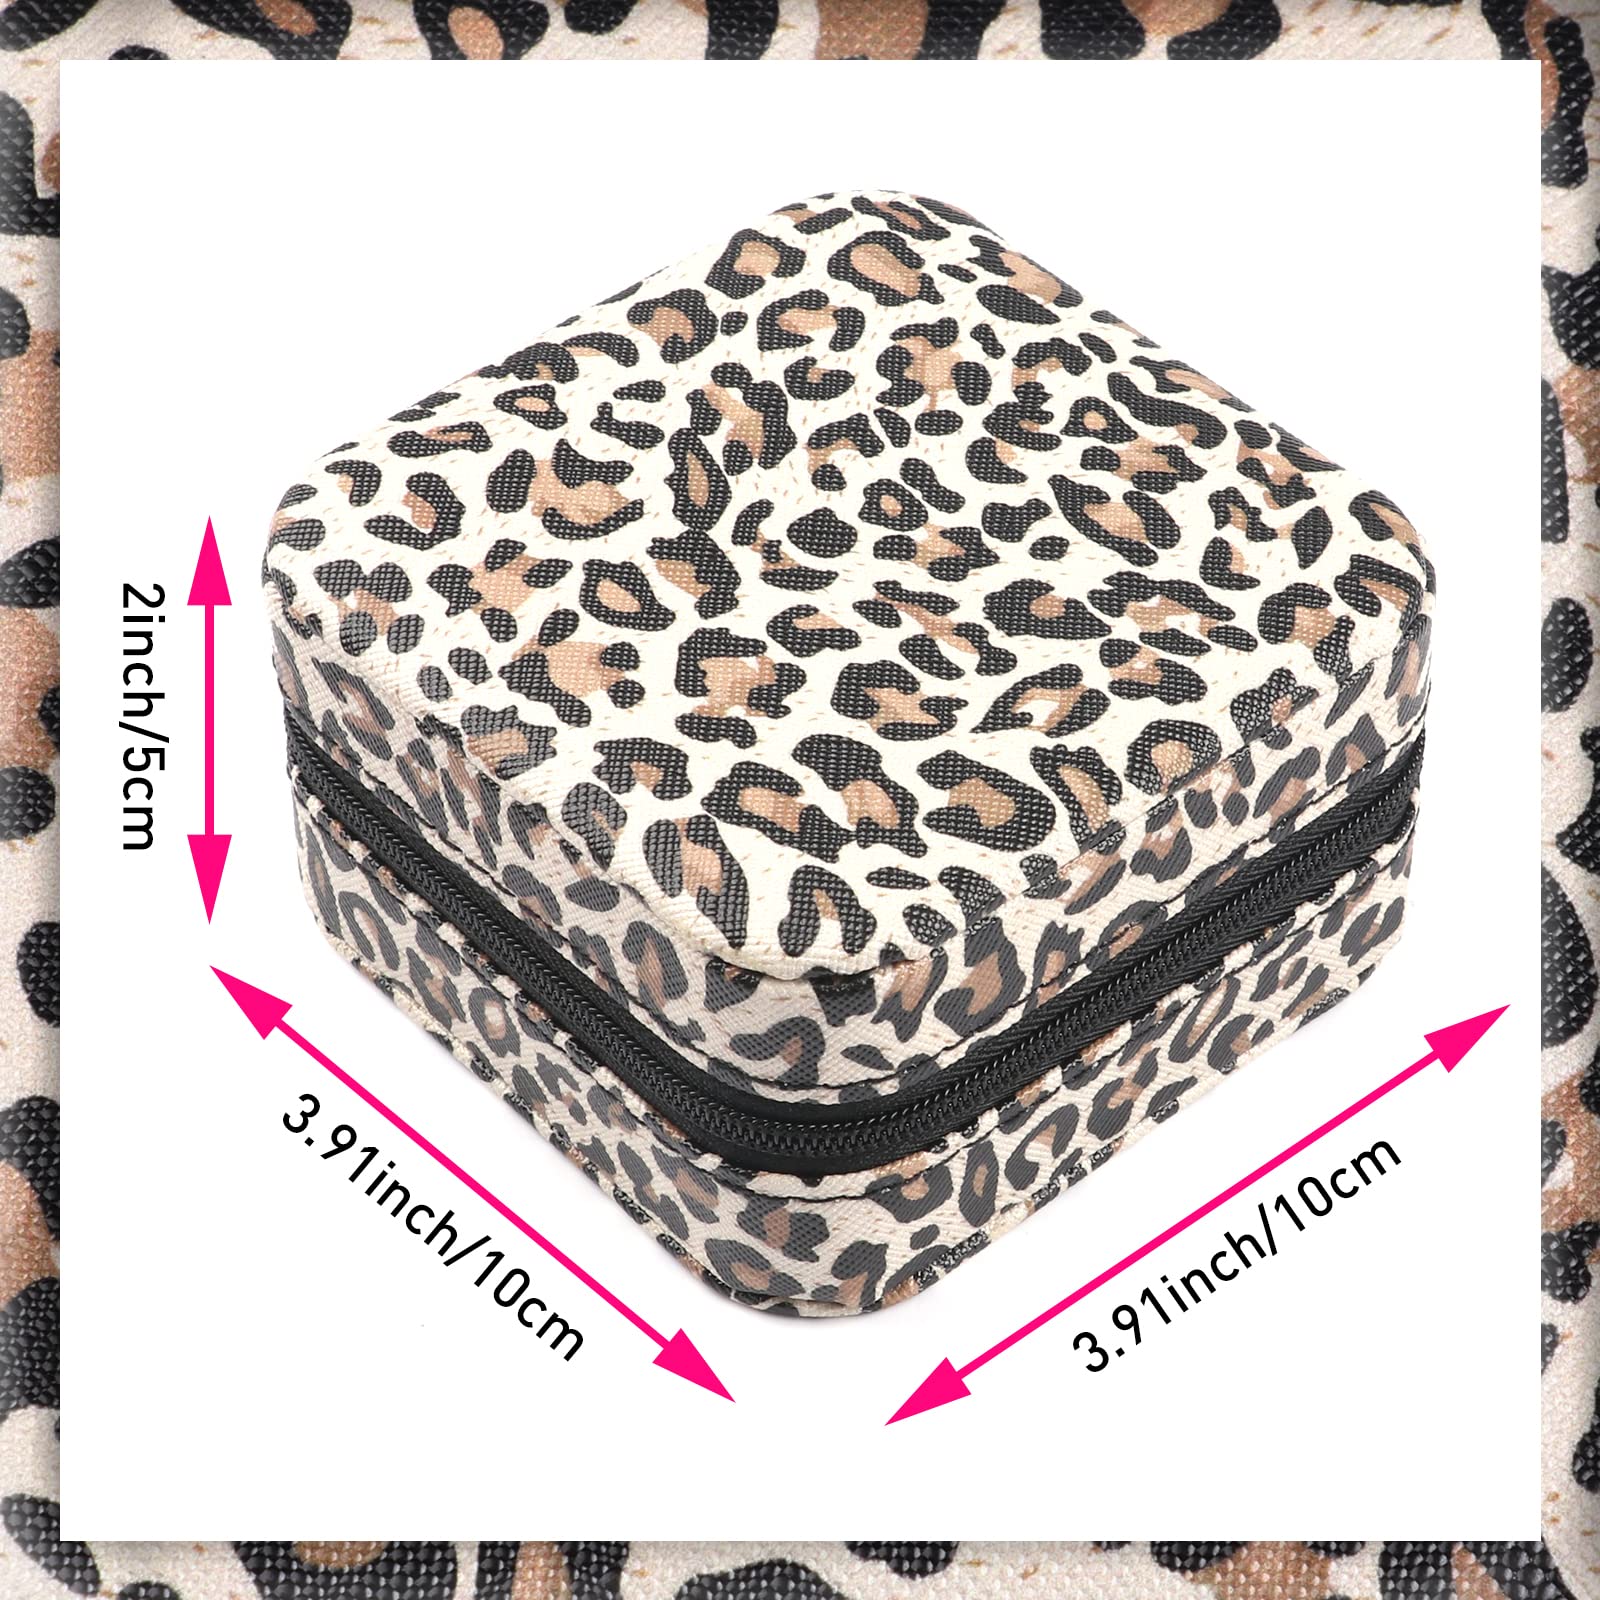 New Design Portable Small Leopard Print Travel Jewelry Organizer Packaging Box for Ring Earring Necklace Bracelet Wholesale